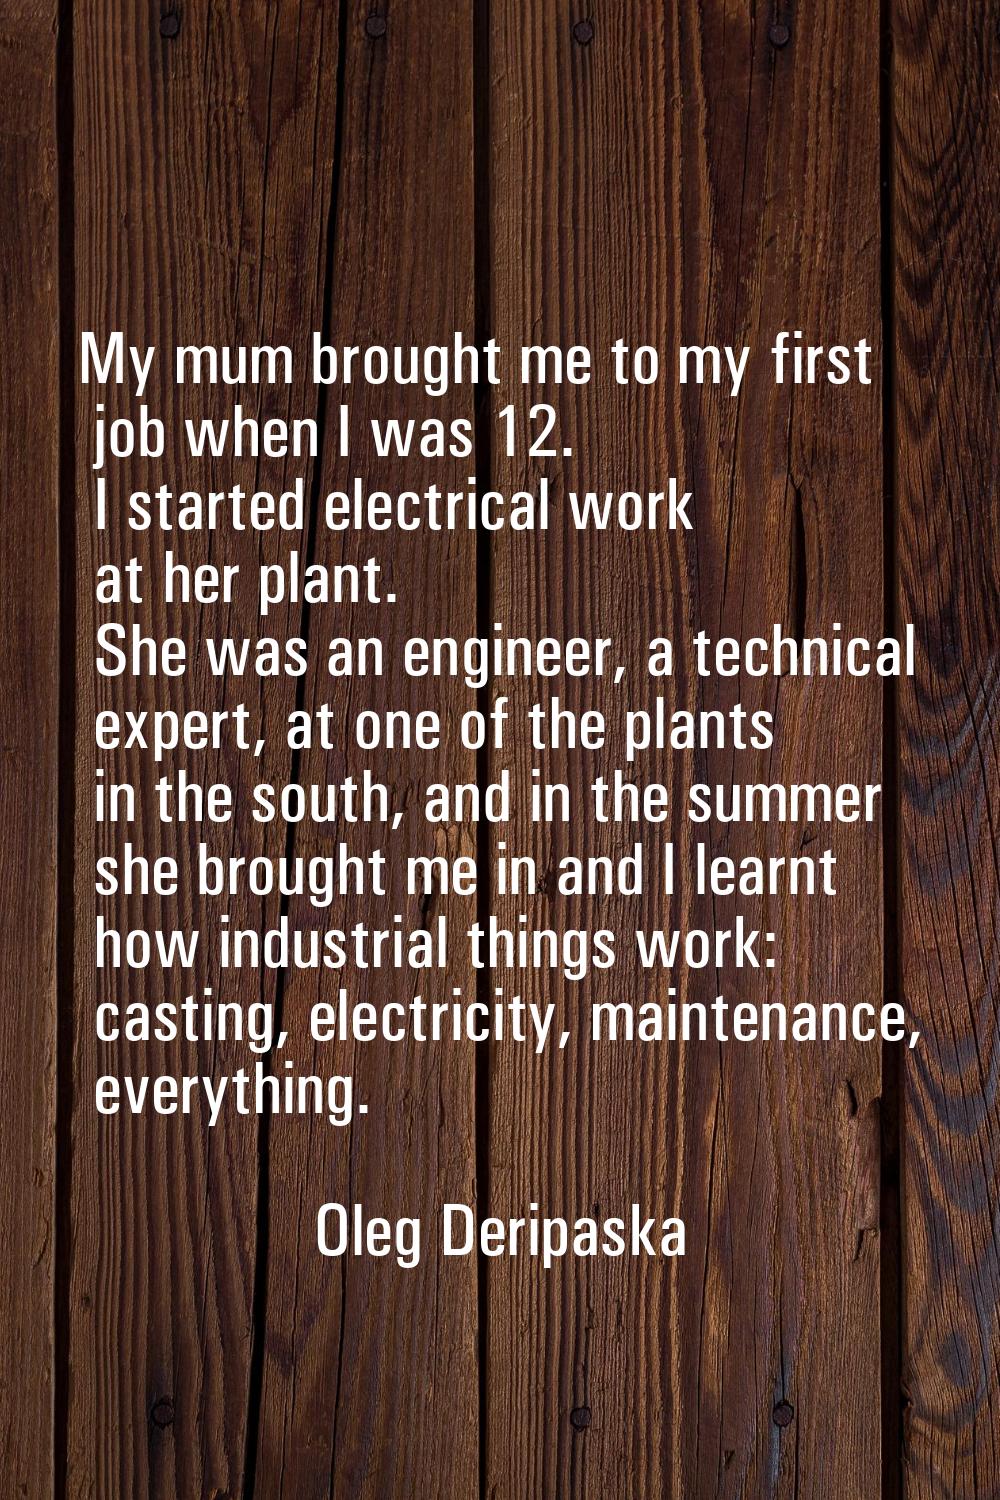 My mum brought me to my first job when I was 12. I started electrical work at her plant. She was an